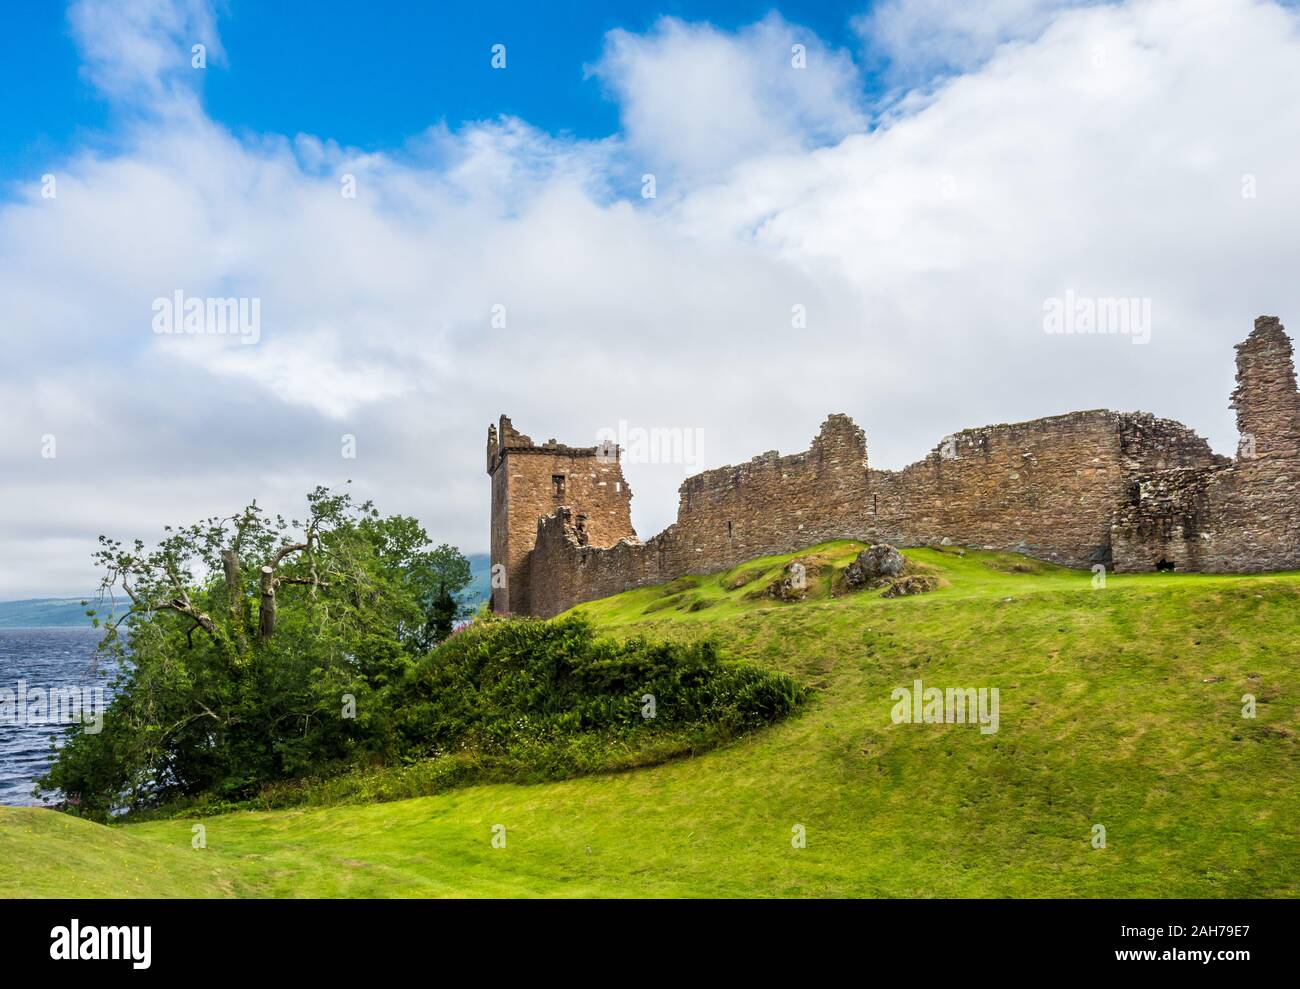 Close up of the ruins of an ancient scottish castle standing on a green hill and overlooking a lake Stock Photo